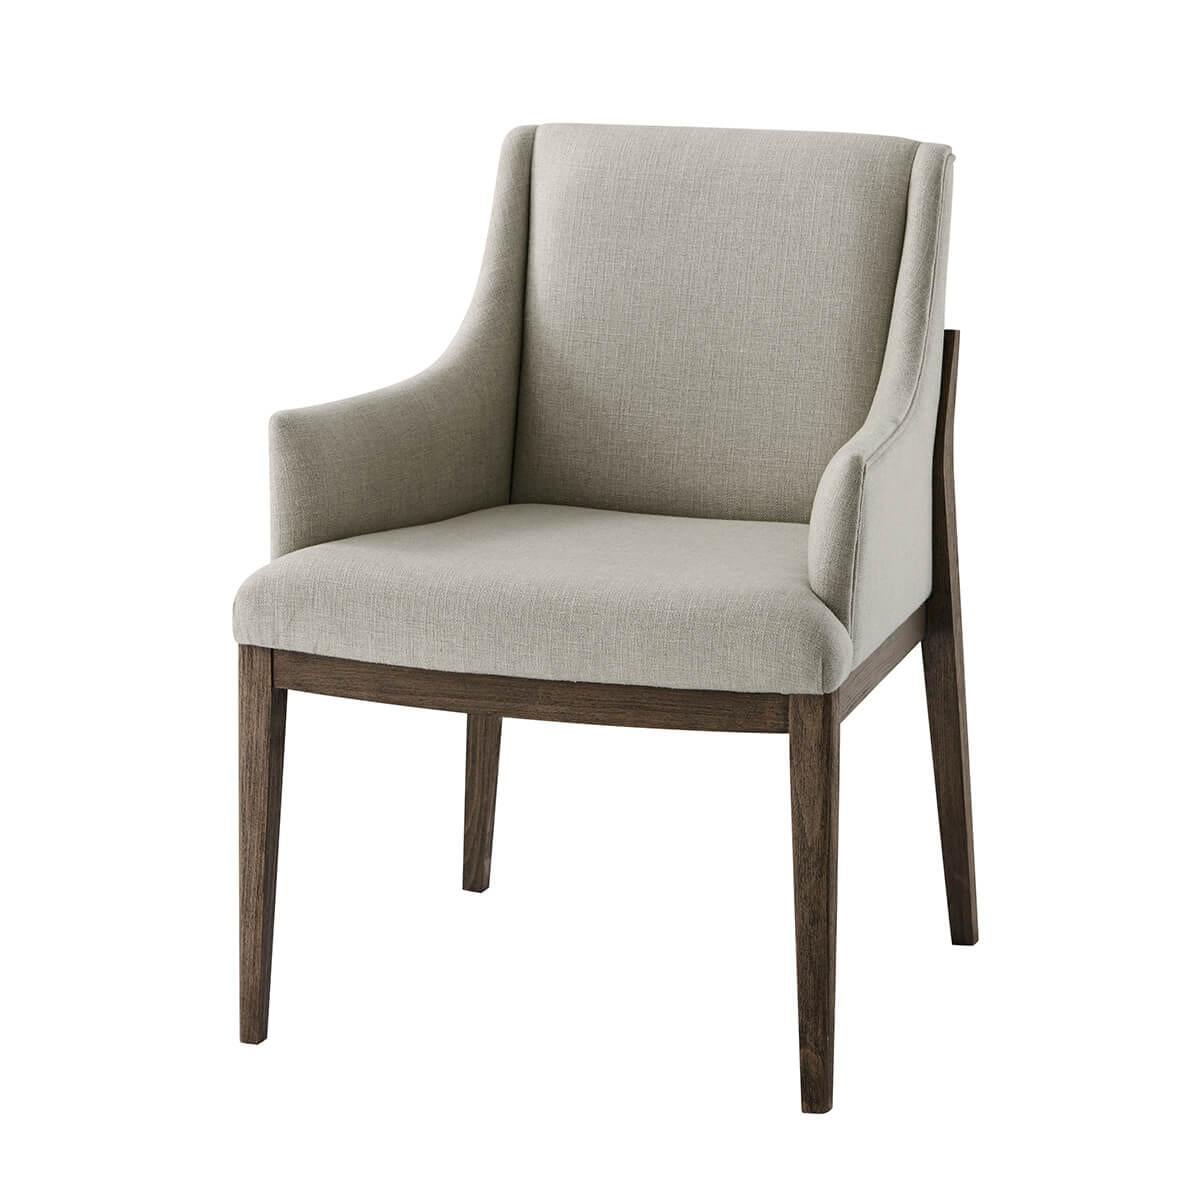 with a brushed beech frame in a dark Charteris finish, with a performance fabric upholstered backrest, seat and arms, raised on tapered legs.

Dimensions: 24.5